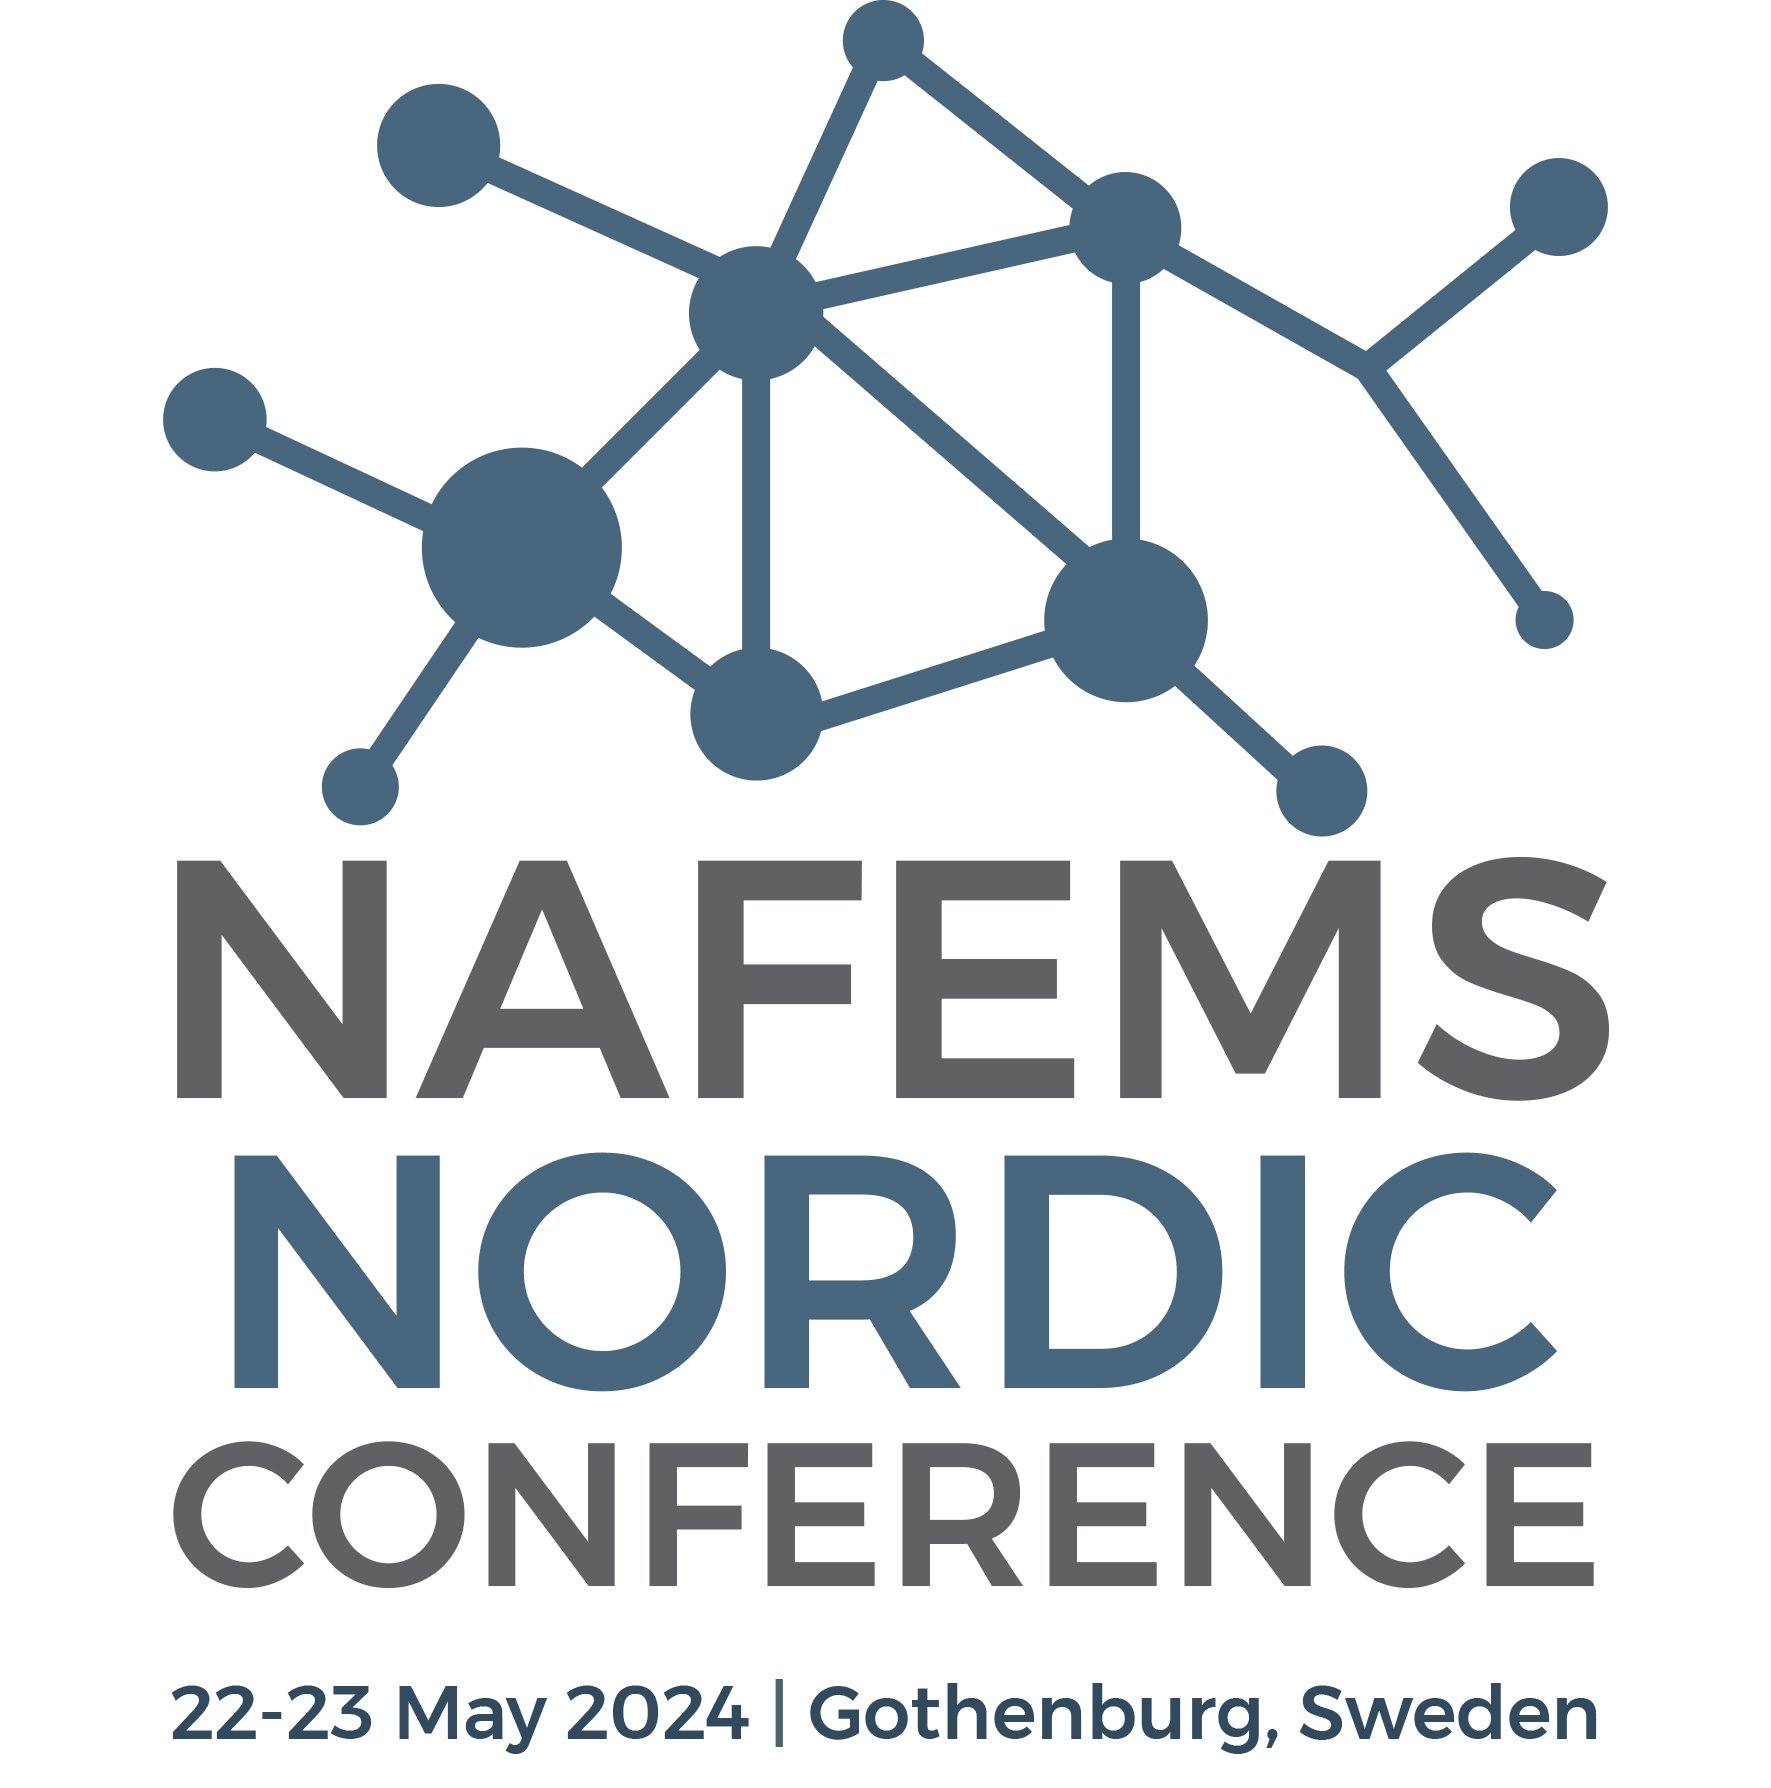 NAFEMS NORDIC Conference 2024